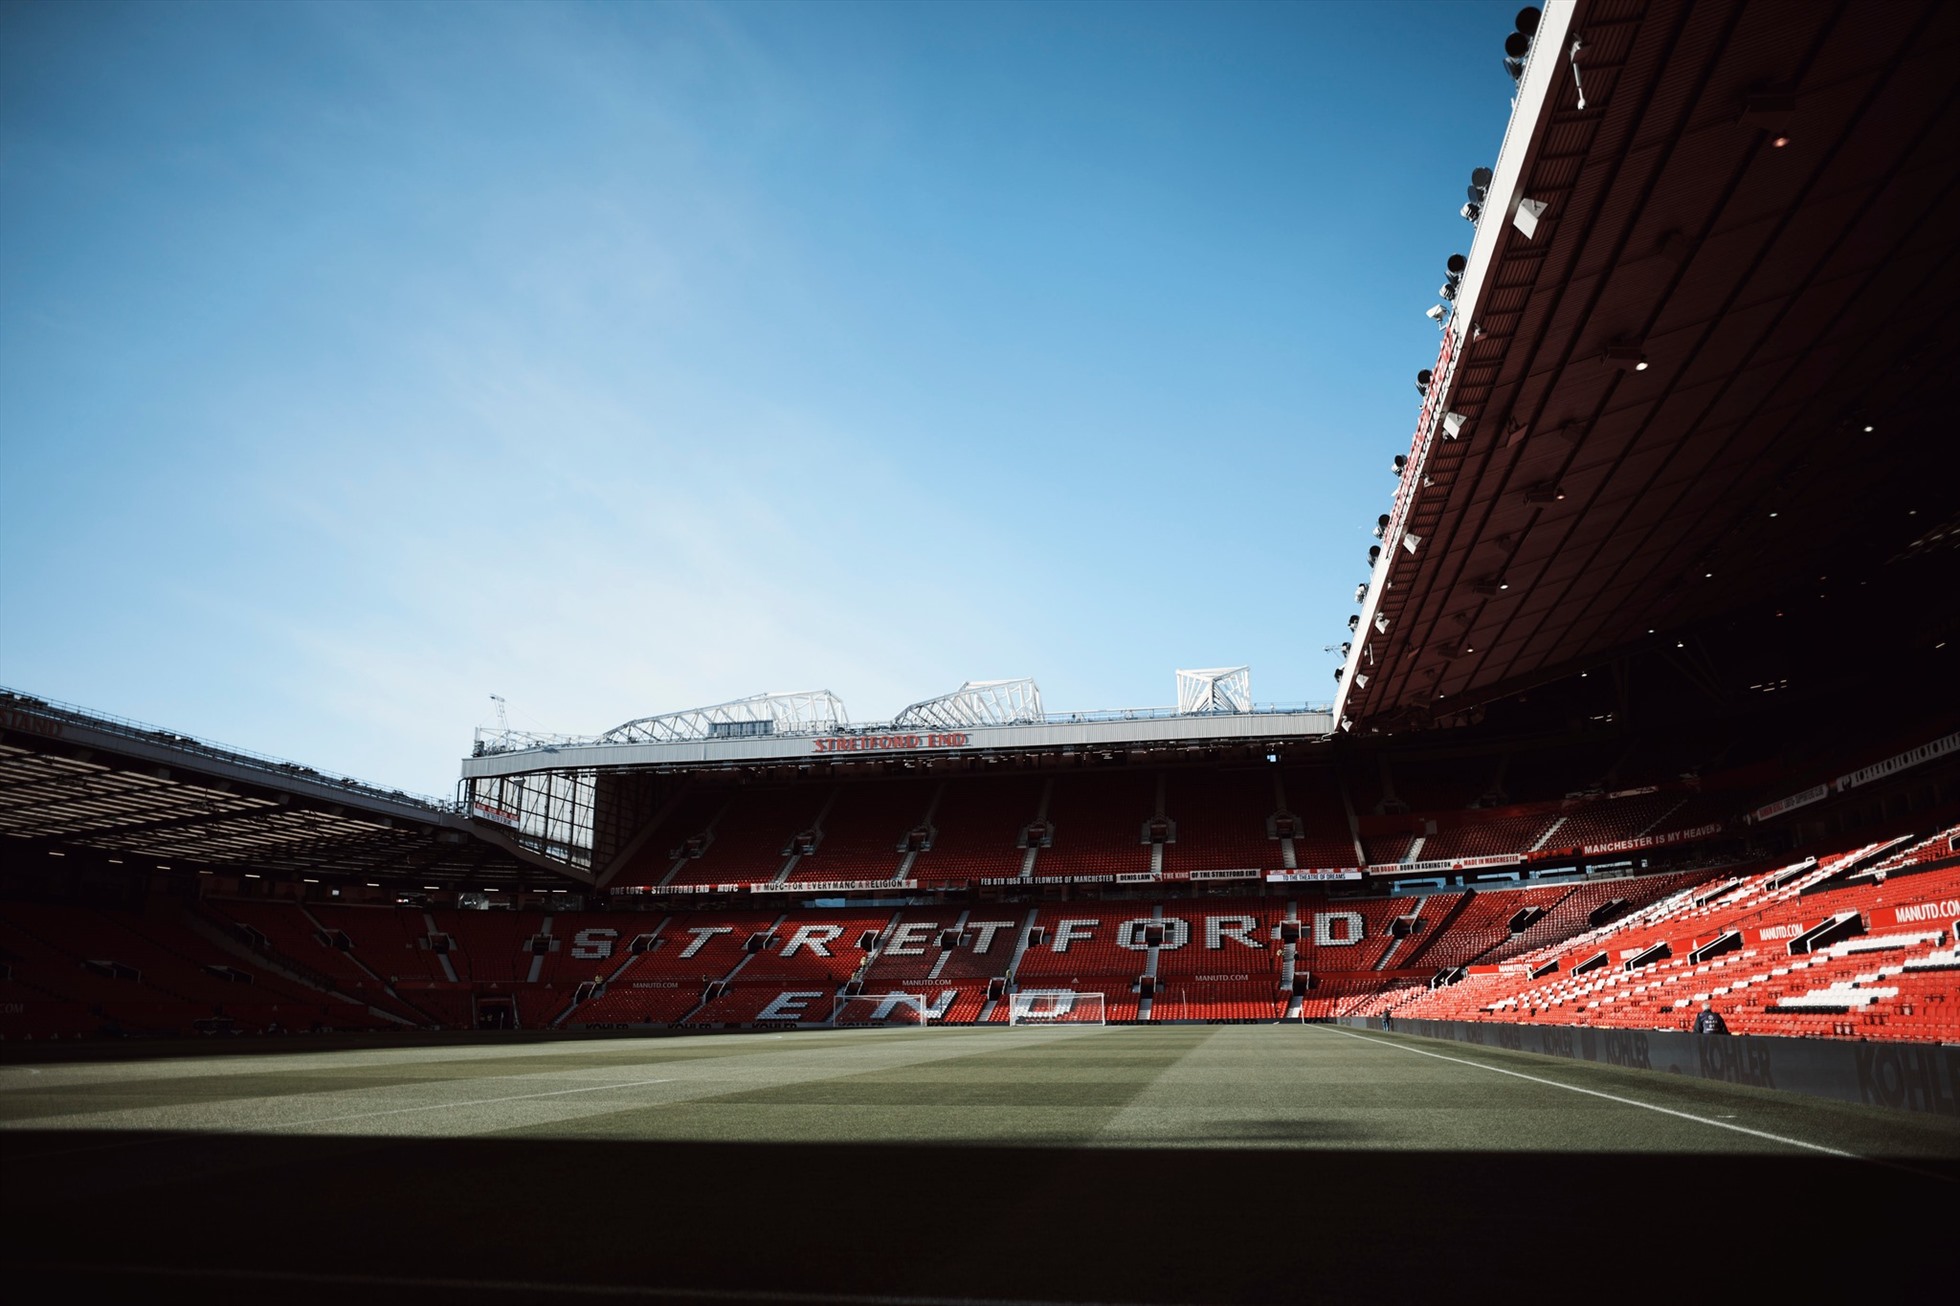 HD wallpaper: Football, Old Trafford, manchester united, ground, soccer,  england | Wallpaper Flare